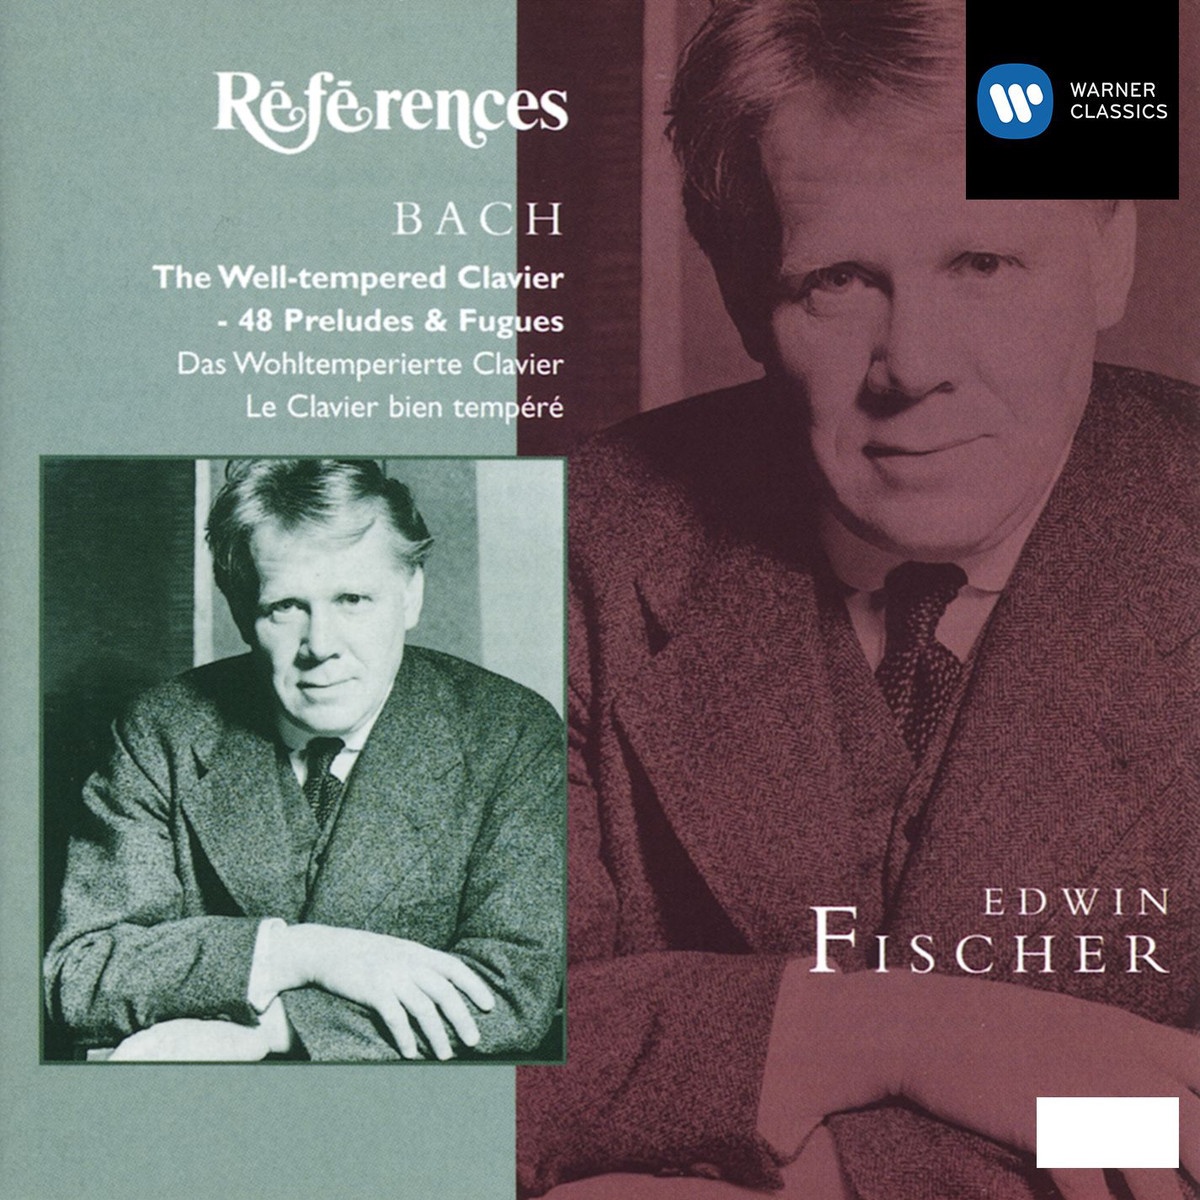 Bach: The Well-Tempered Clavier - 48 Preludes & Fugues BWV 846-893